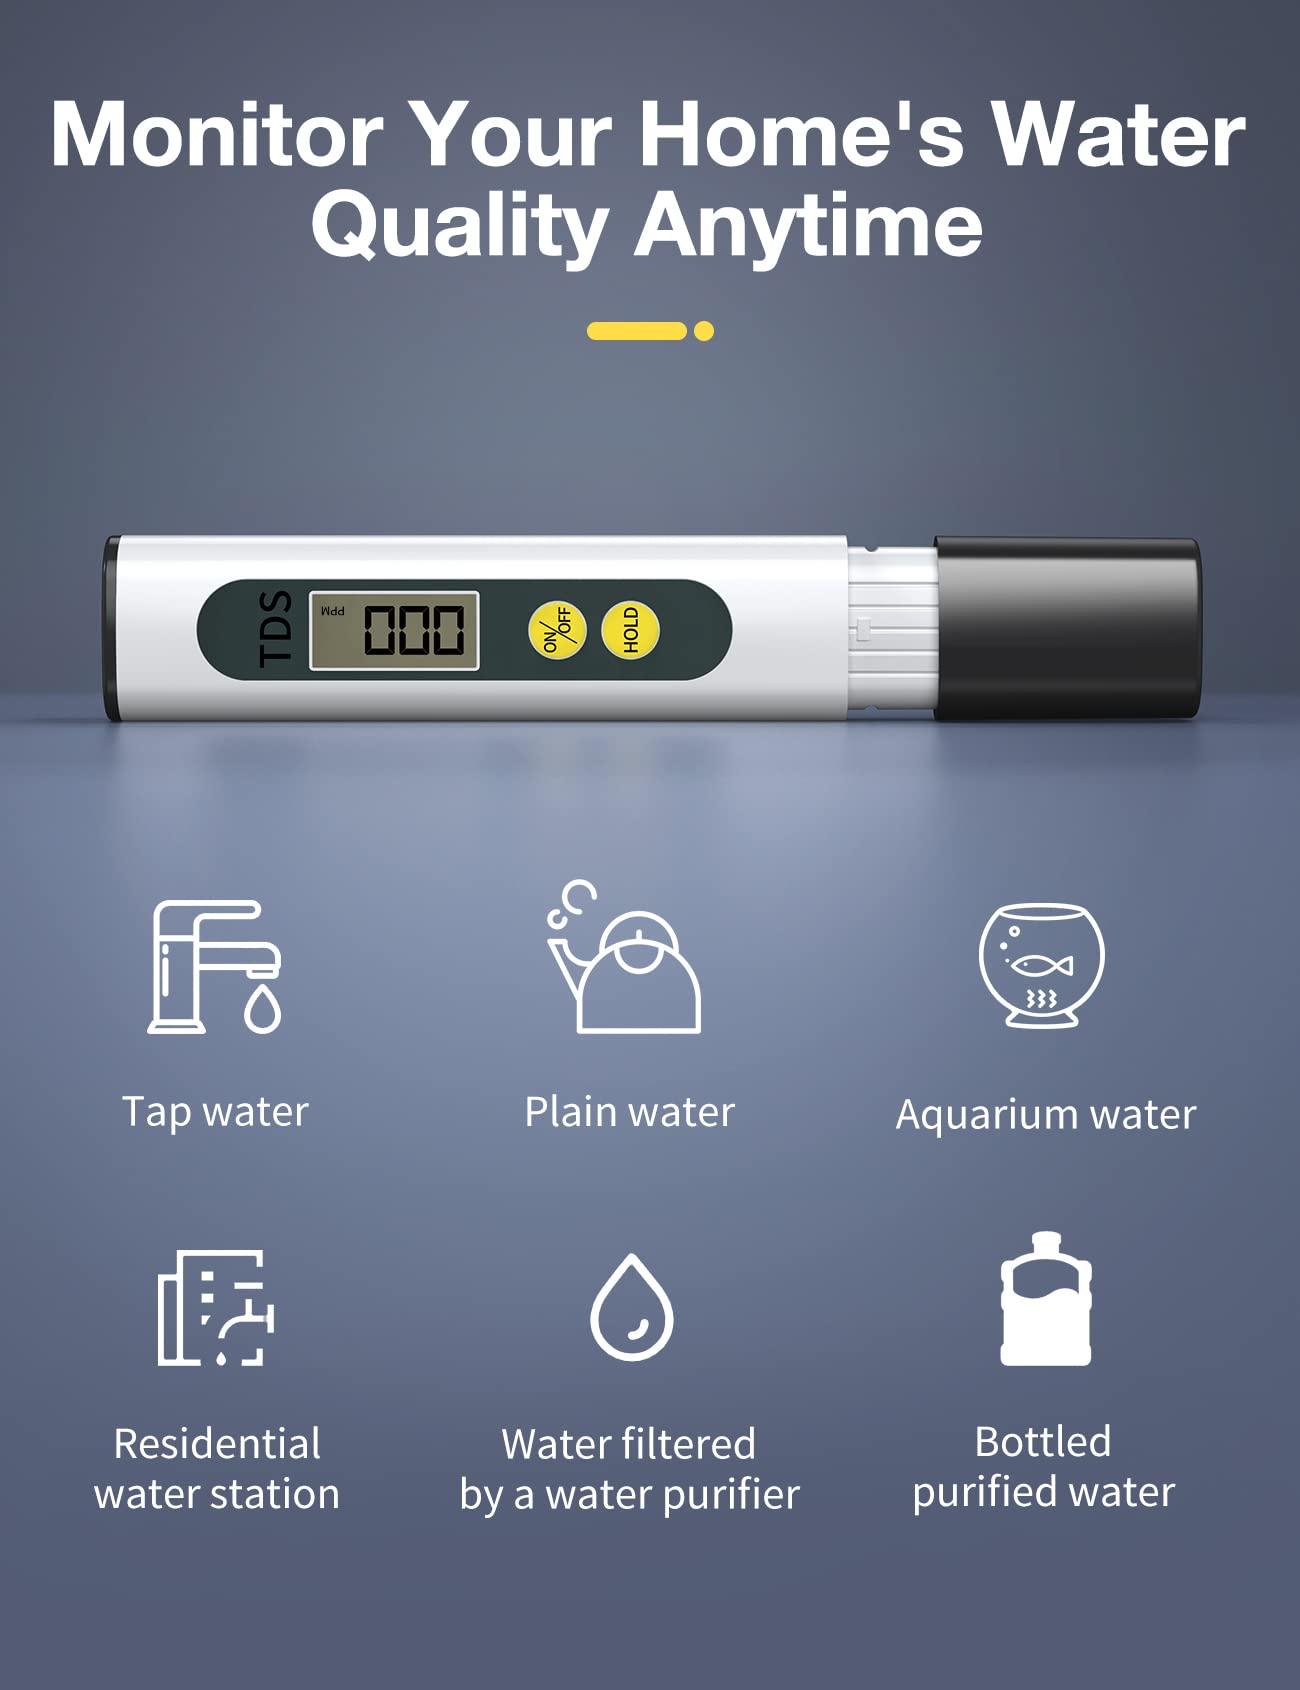 Tds Meter Digital Water Tester - Affordable & Reliable Water Testing Kits for Drinking Water - 0-9990ppm - 1s Get Accurate Reasult for Home, Well, Tap Water Quality Test and More!